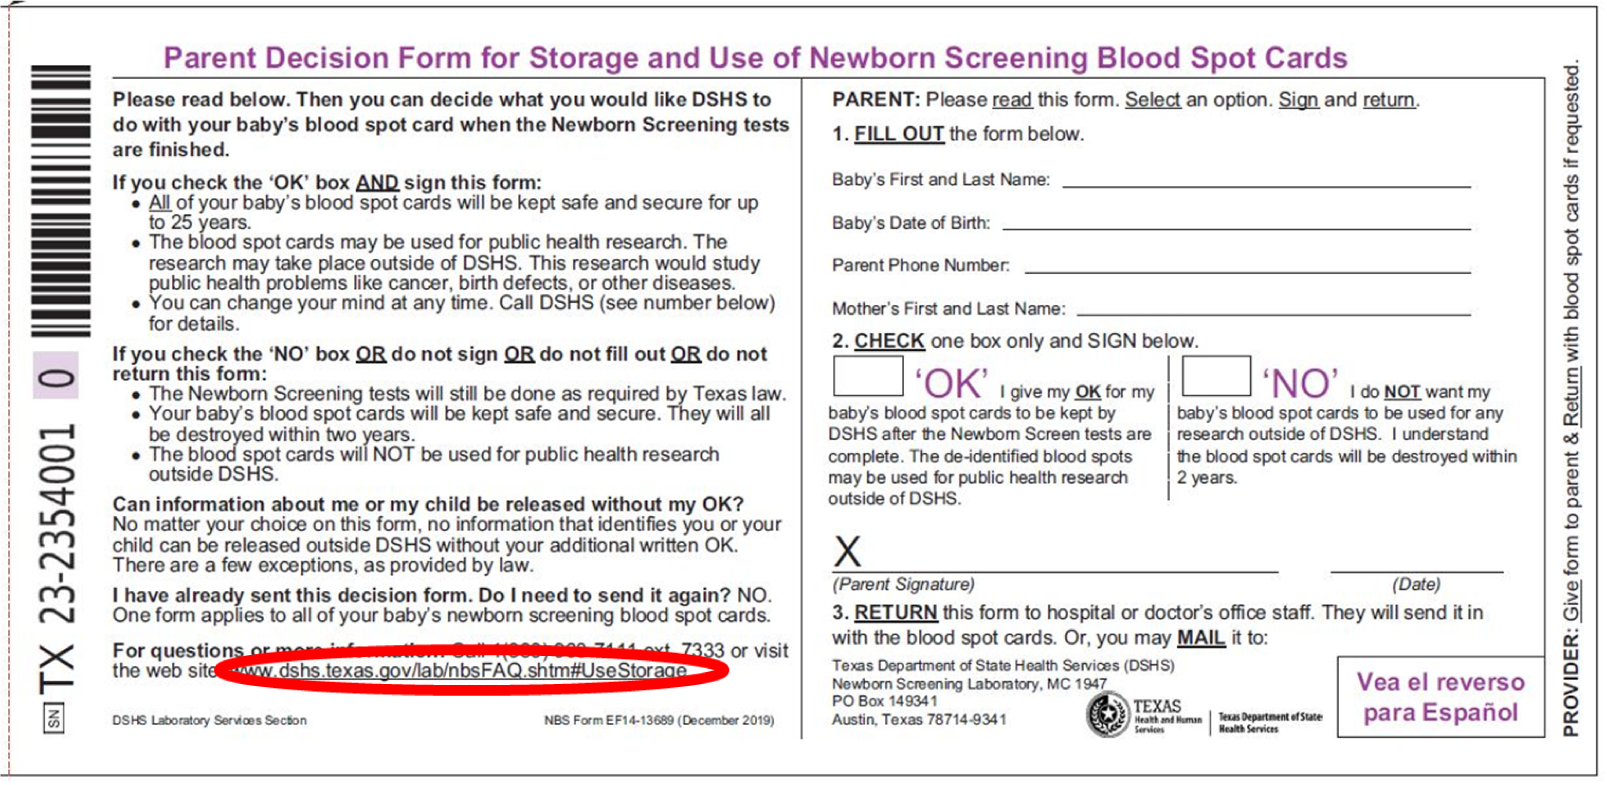 "Correct Website to Parent Decision Form for Storage and Use of  Newborn Screening Blood Spot Cards Information "